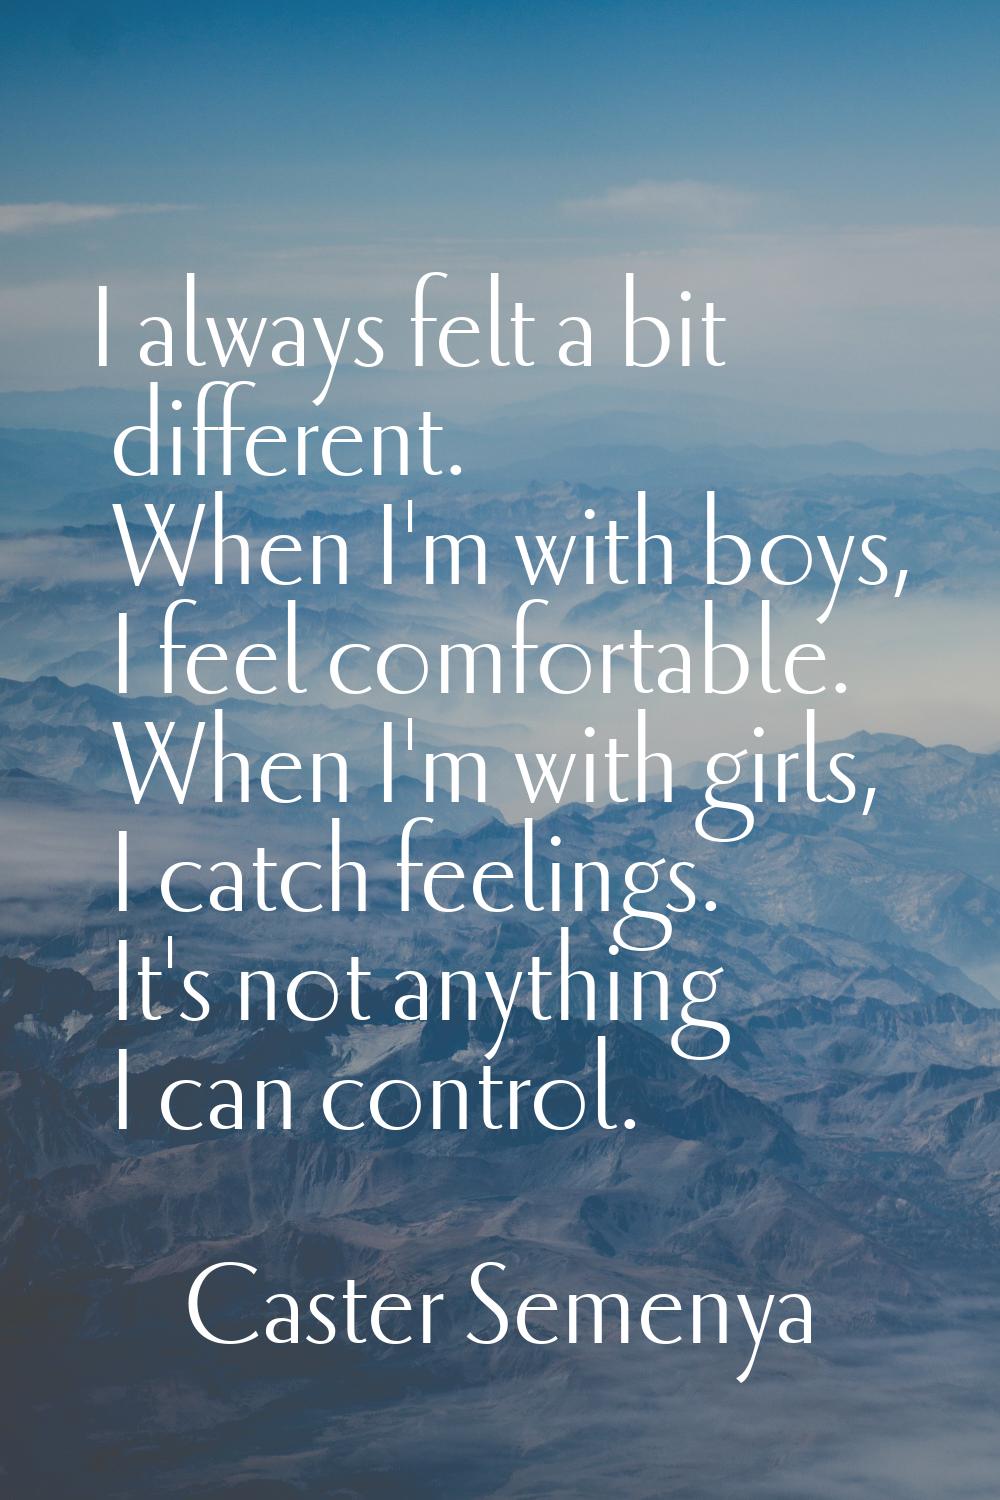 I always felt a bit different. When I'm with boys, I feel comfortable. When I'm with girls, I catch